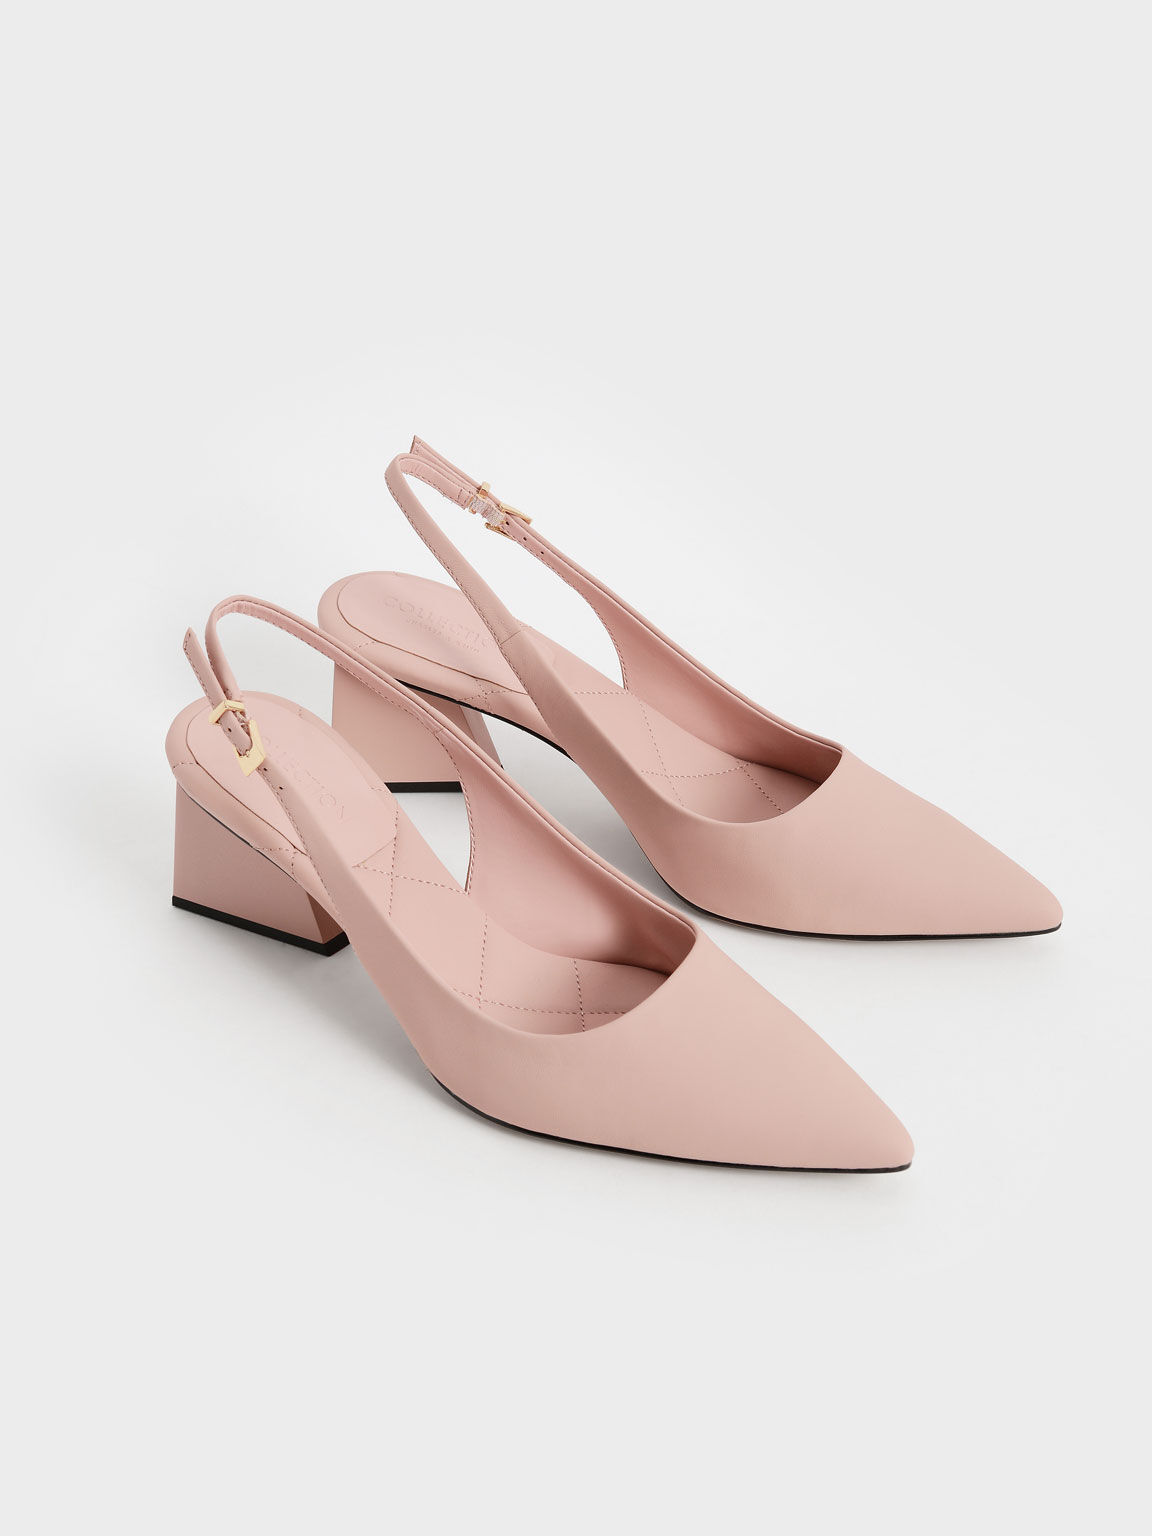 Leather Pointed Toe Slingback Pumps, Pink, hi-res